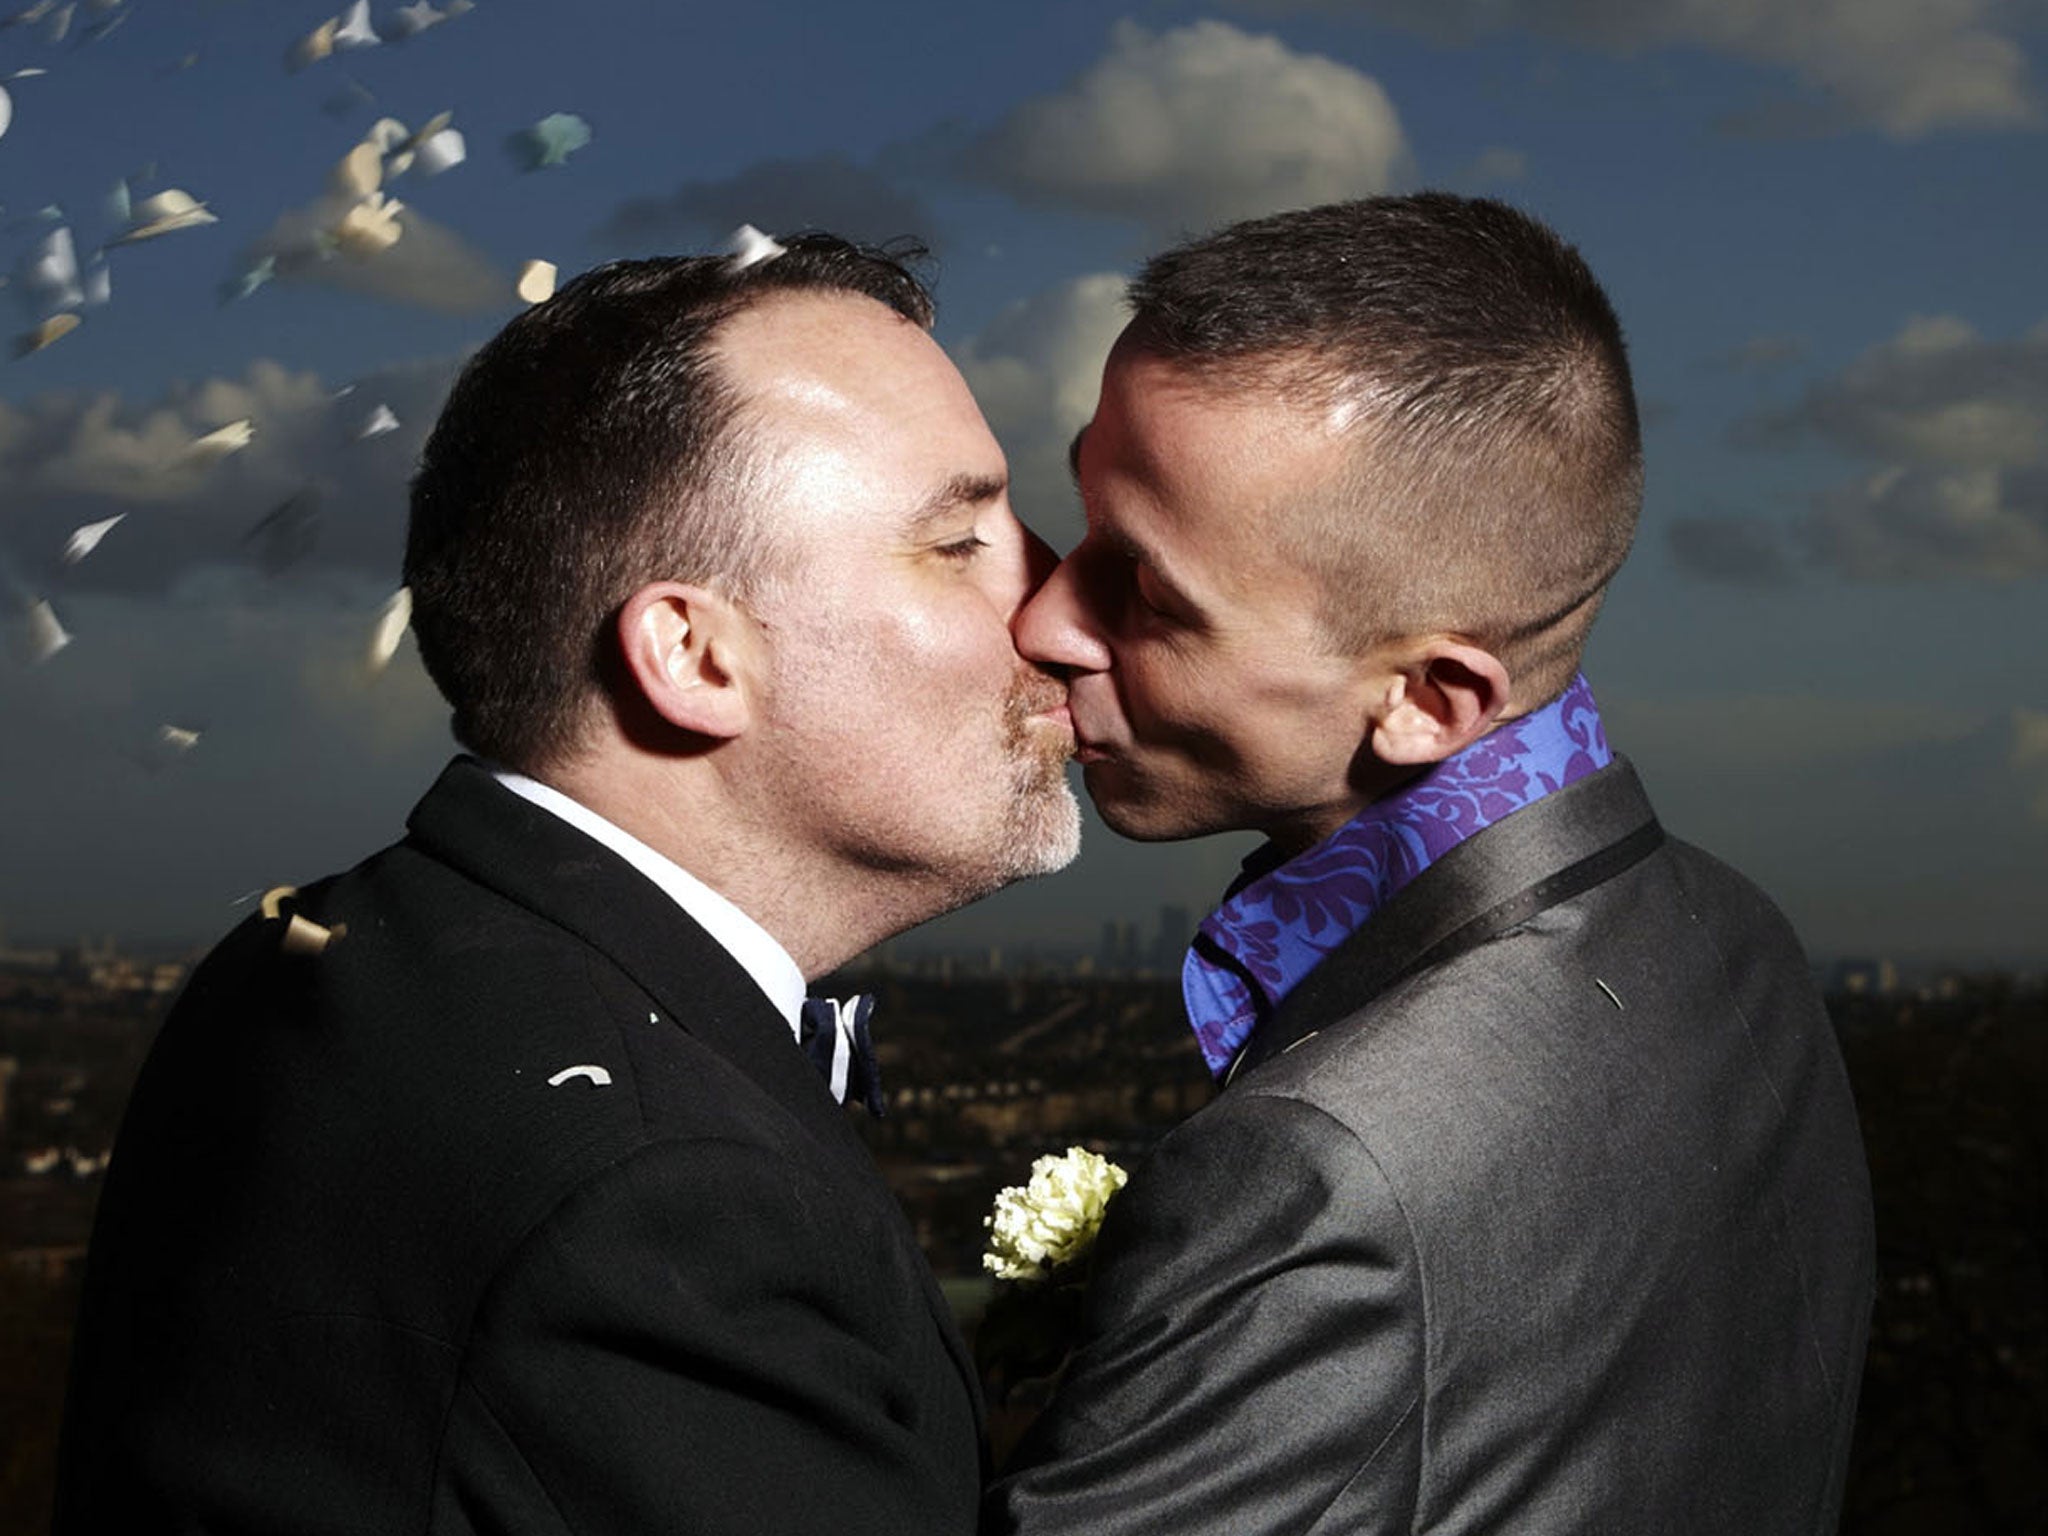 The couple will marry shortly after the equal marriage bill is passed